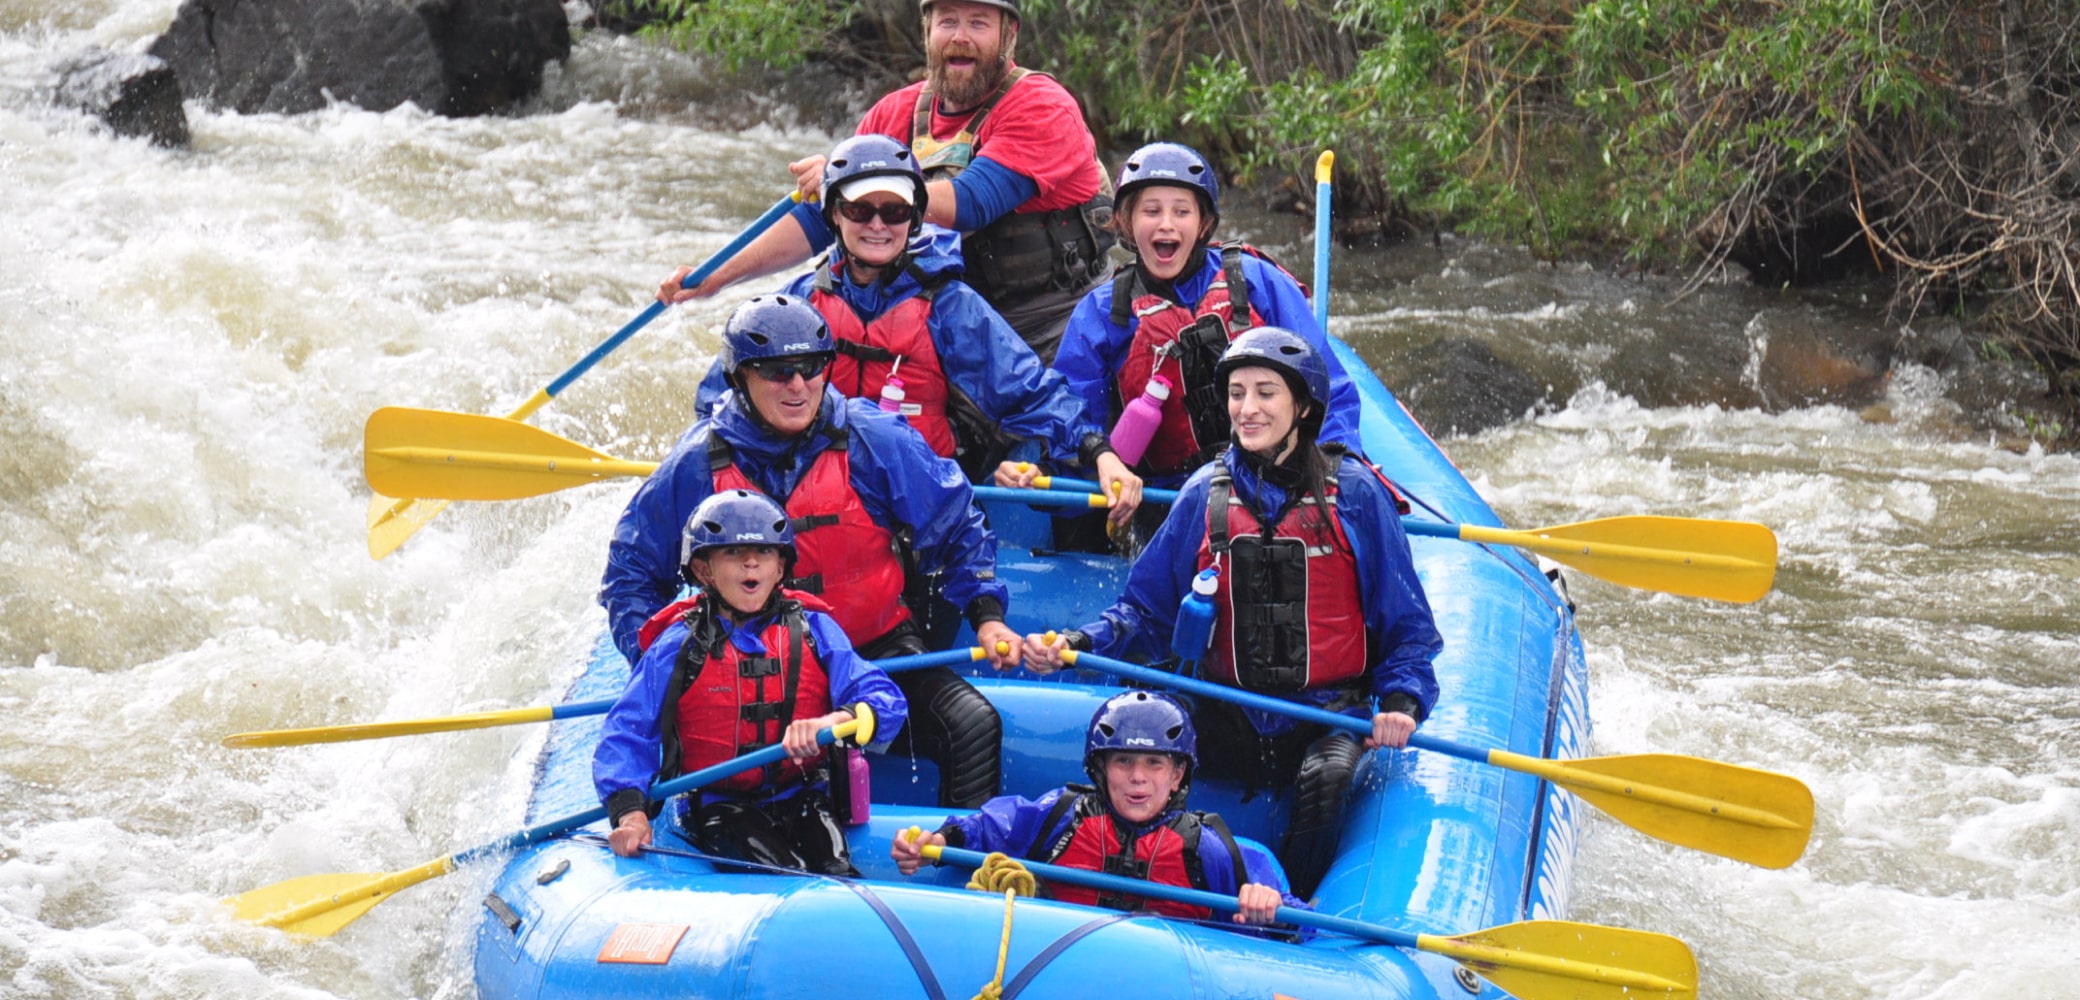 Guests enjoying white water rafting for beginners